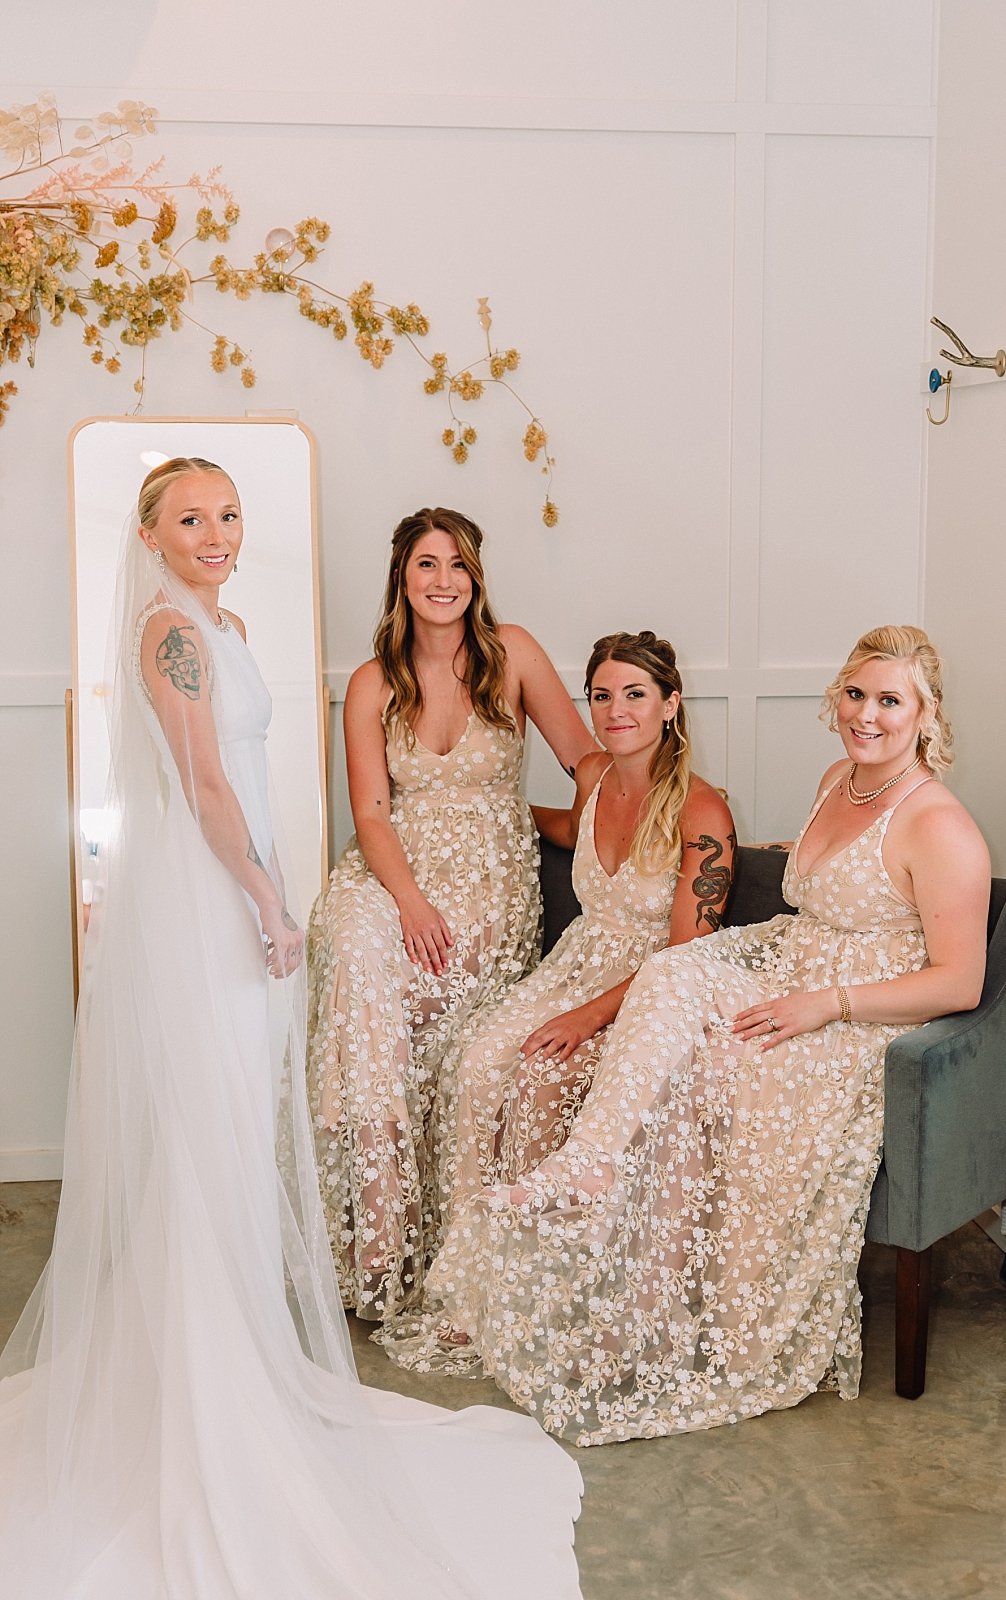 bride and bridesmaids get ready in the bridal room at The Orchard wedding venue, sitting bridesmaid poses